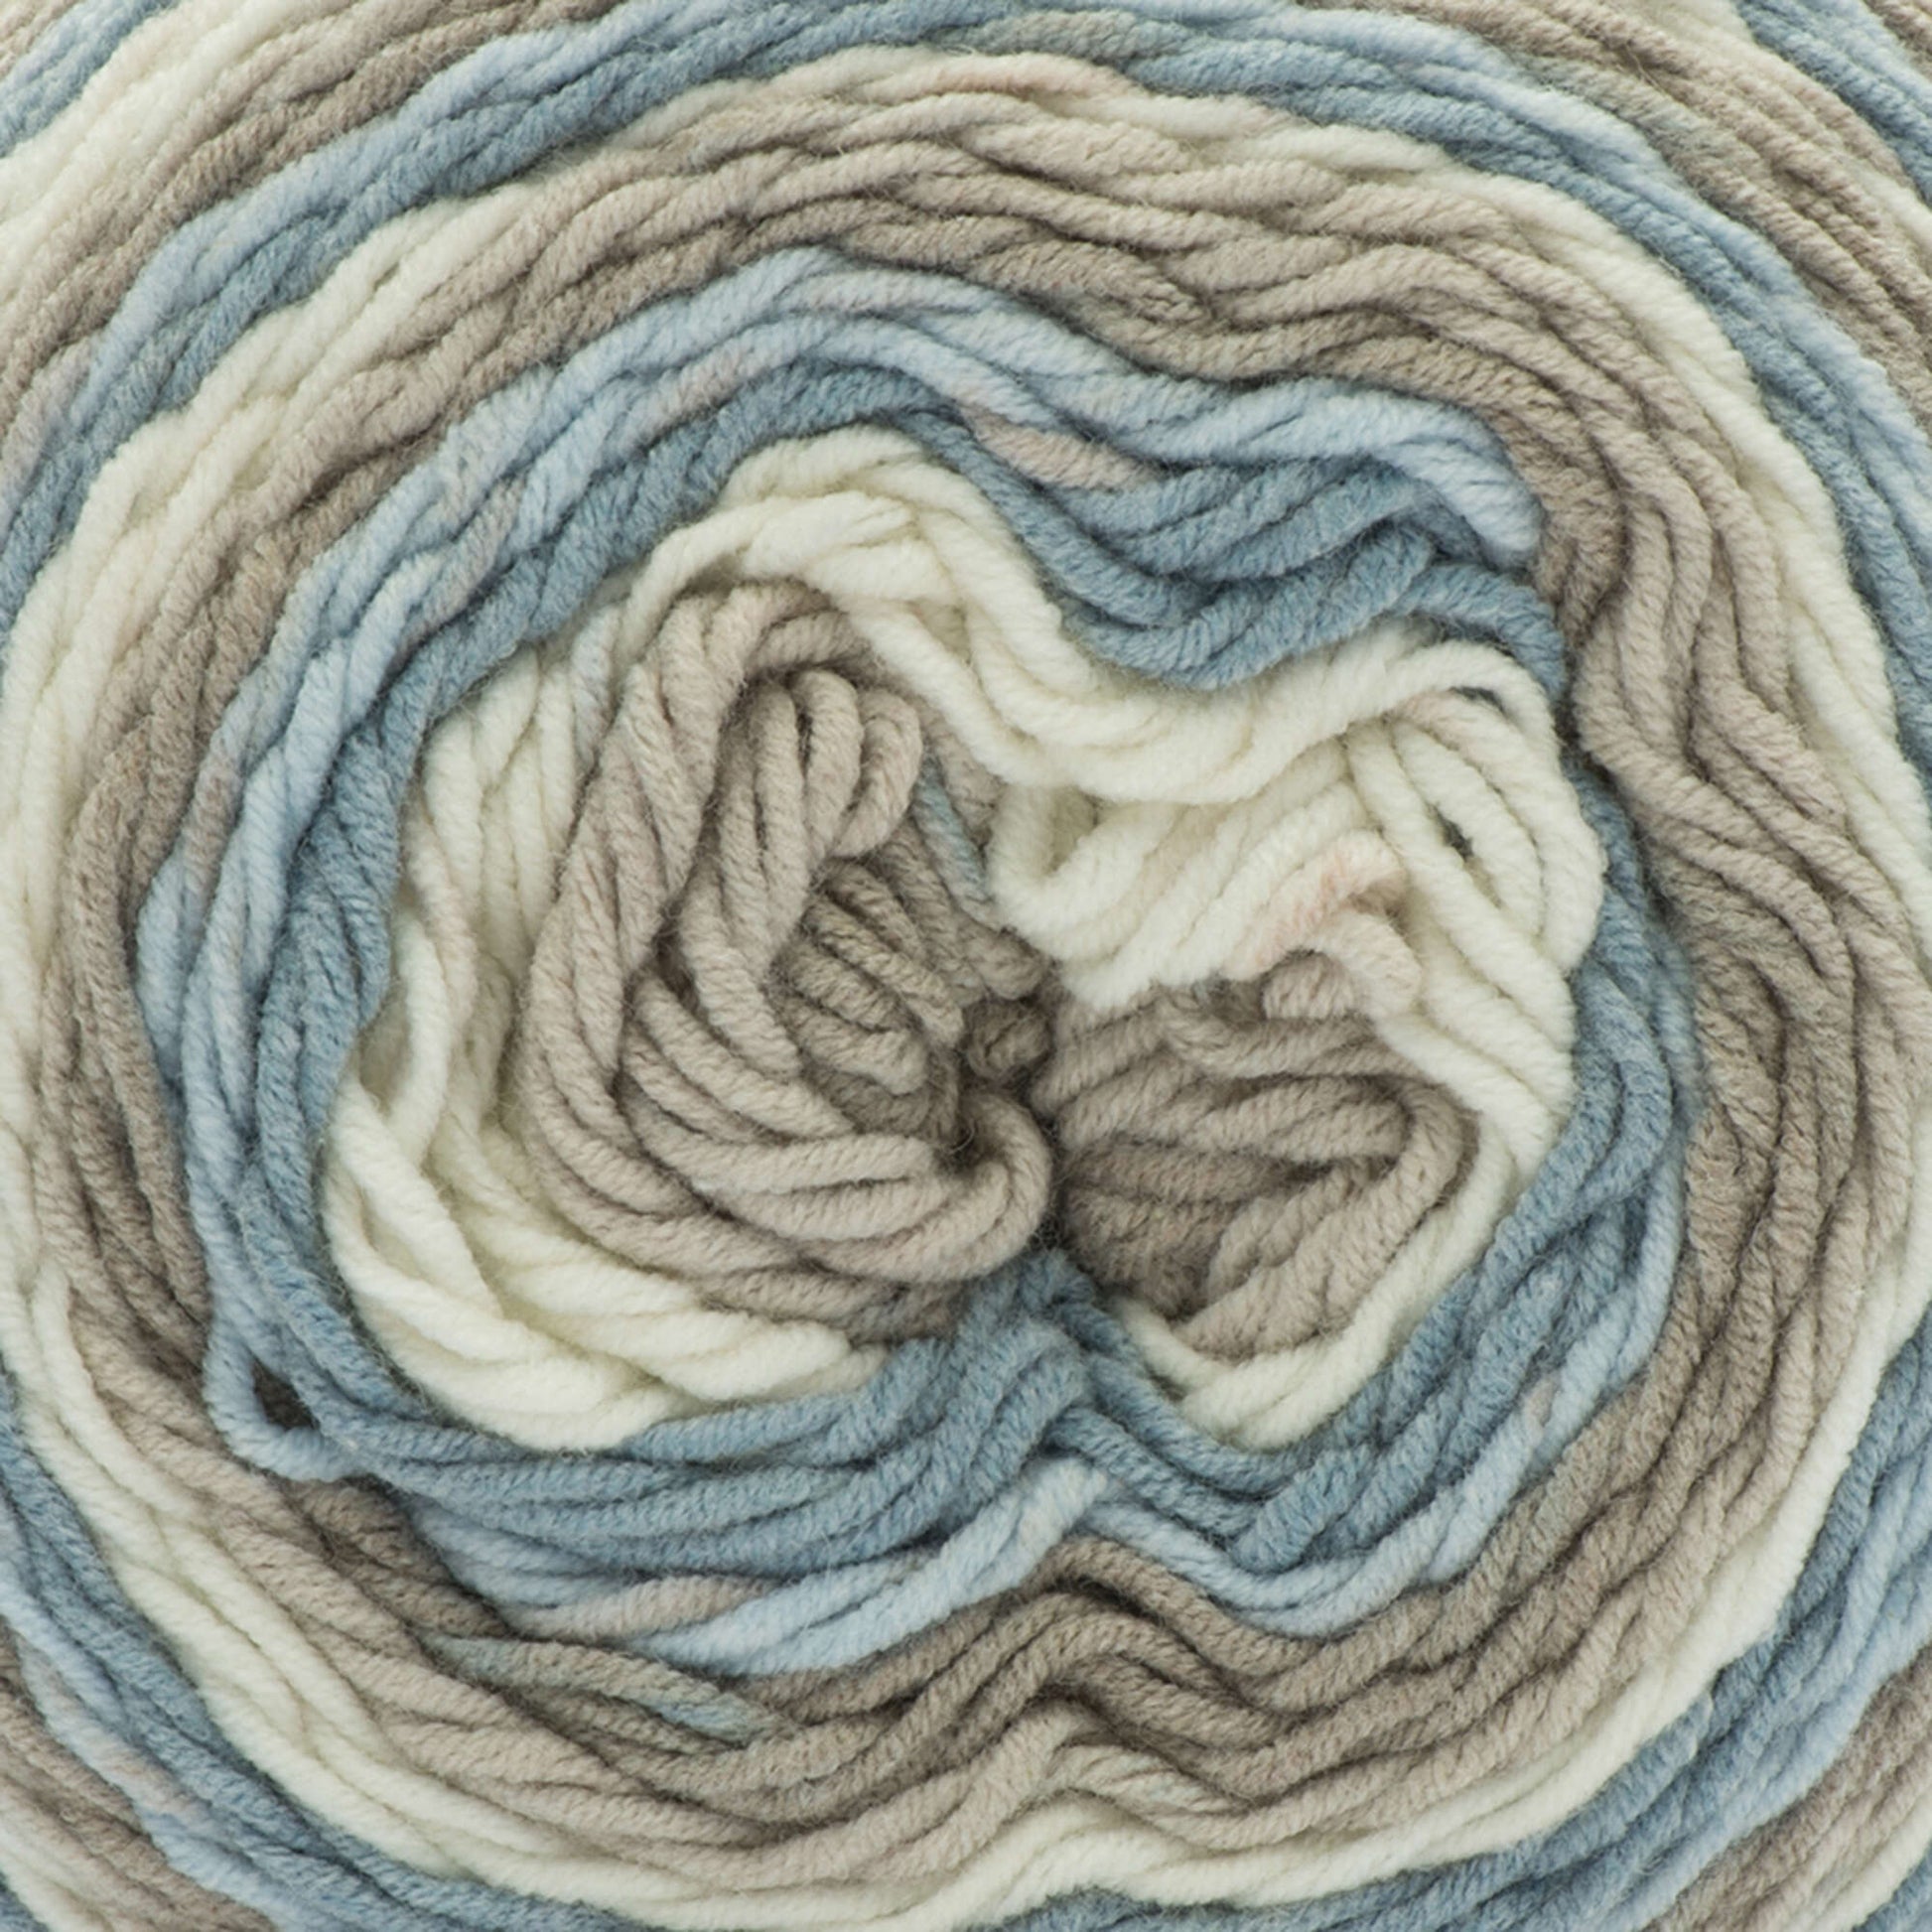 Caron cakes yarn • Compare & find best prices today »